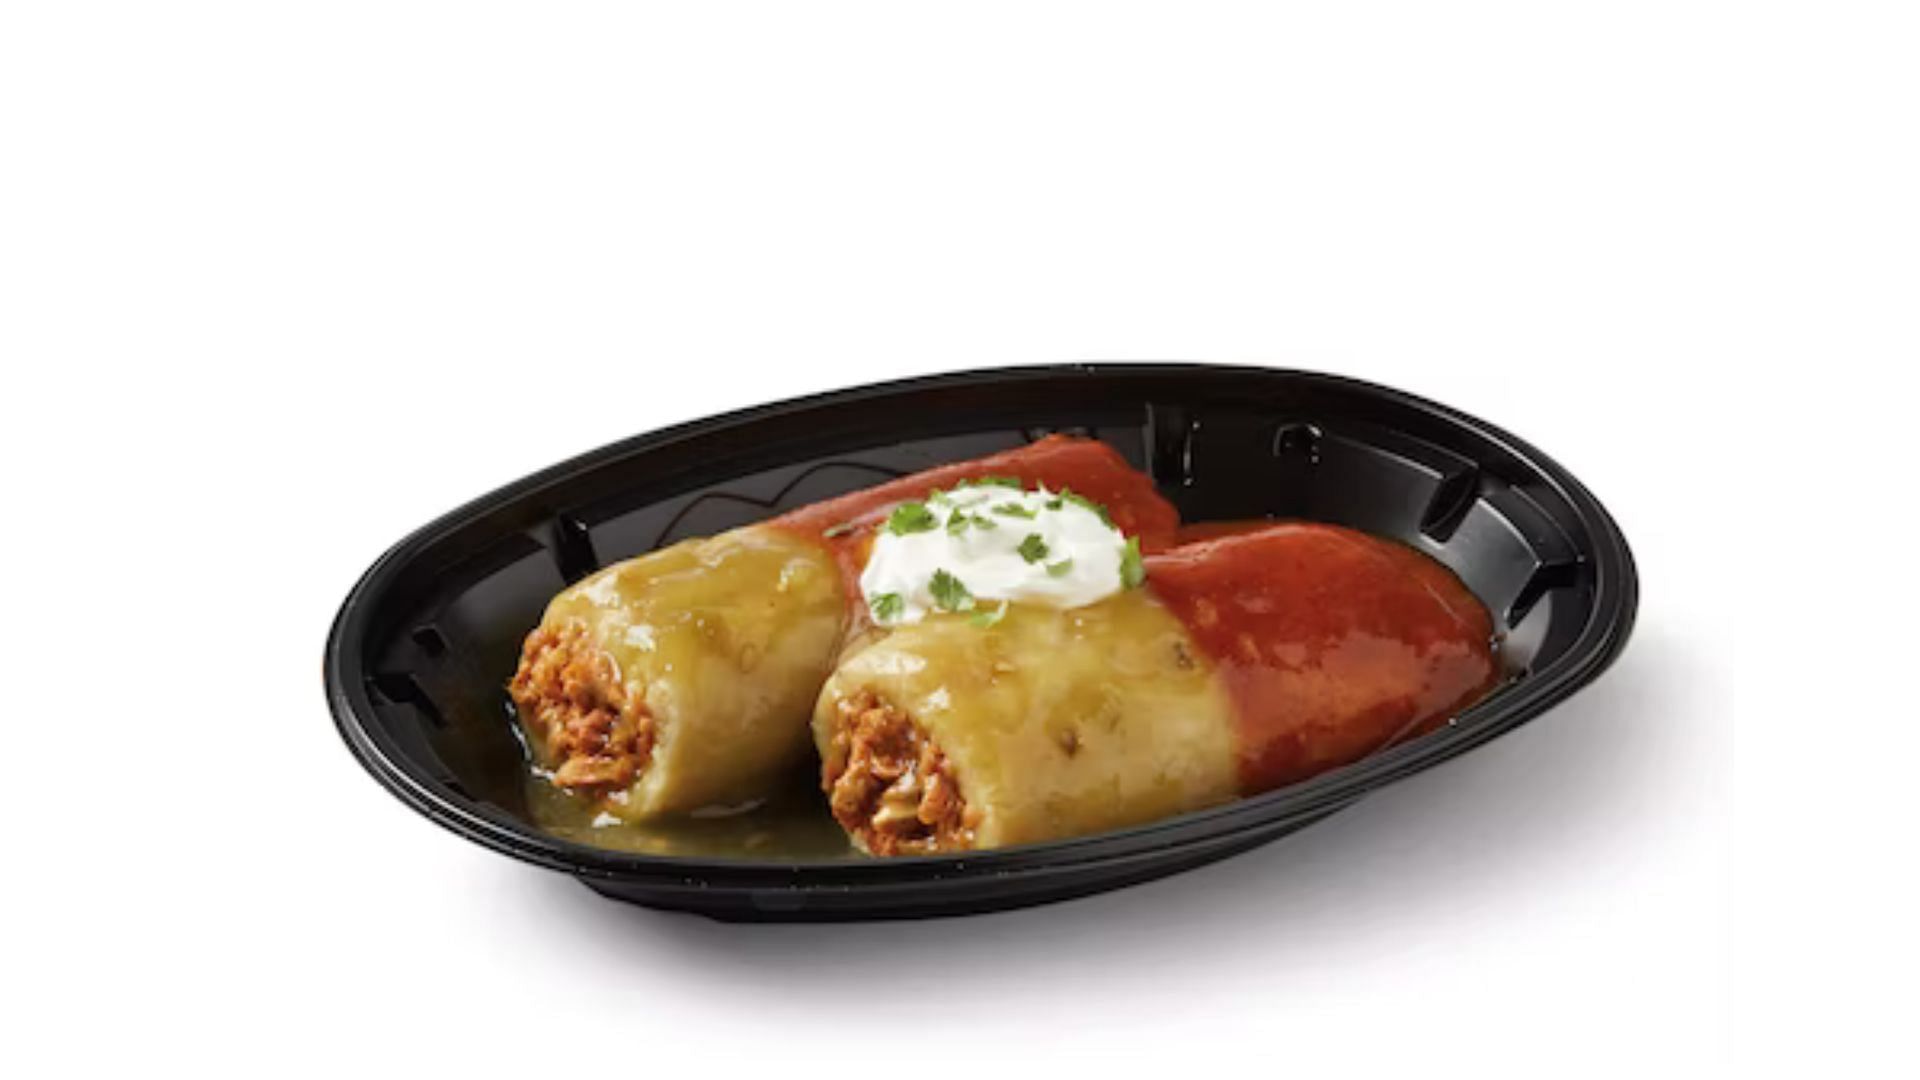 Which items are included in Del Taco’s Tamale Menu? Prices